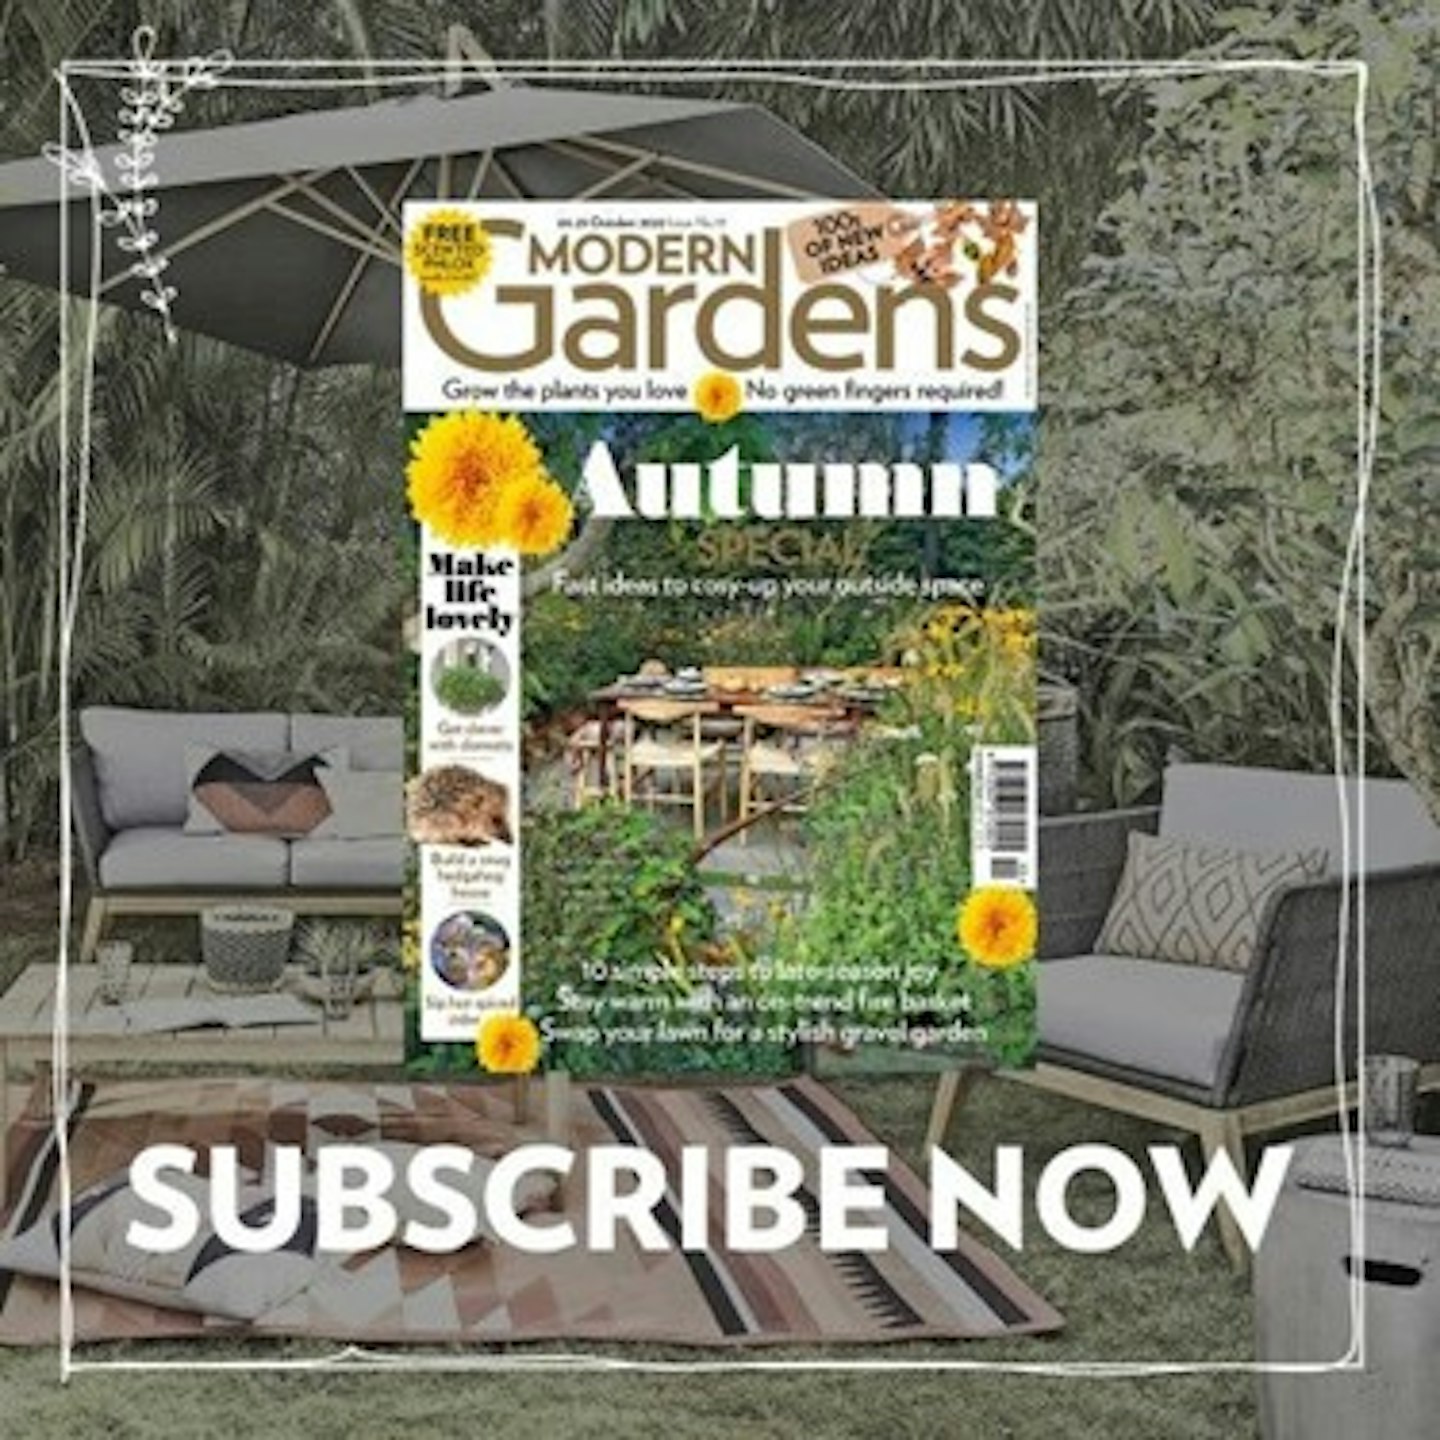  Relax with a subscription to Modern Gardens magazine